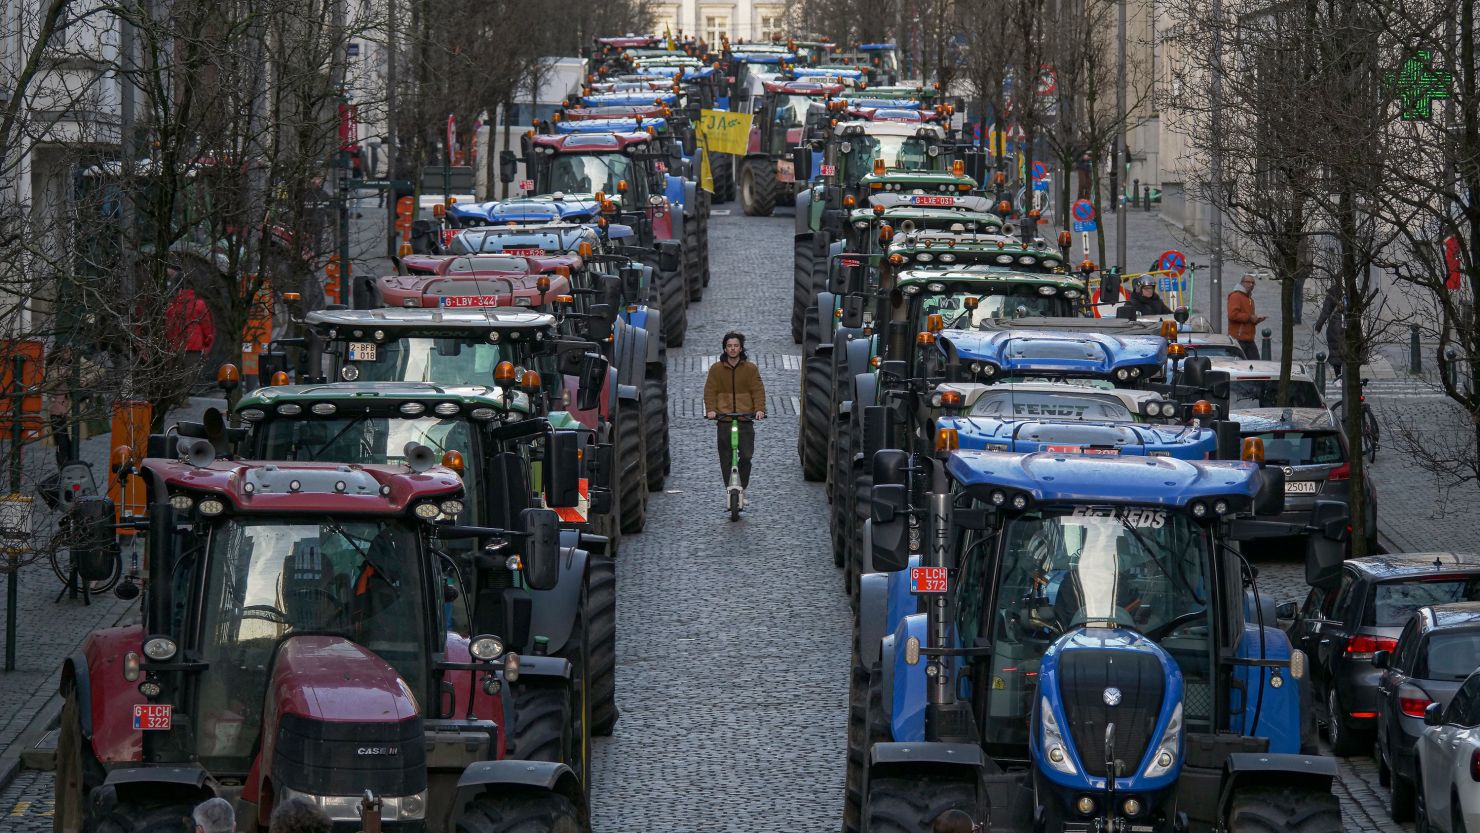 Understanding the Root Causes of Farmers’ Protests in Europe